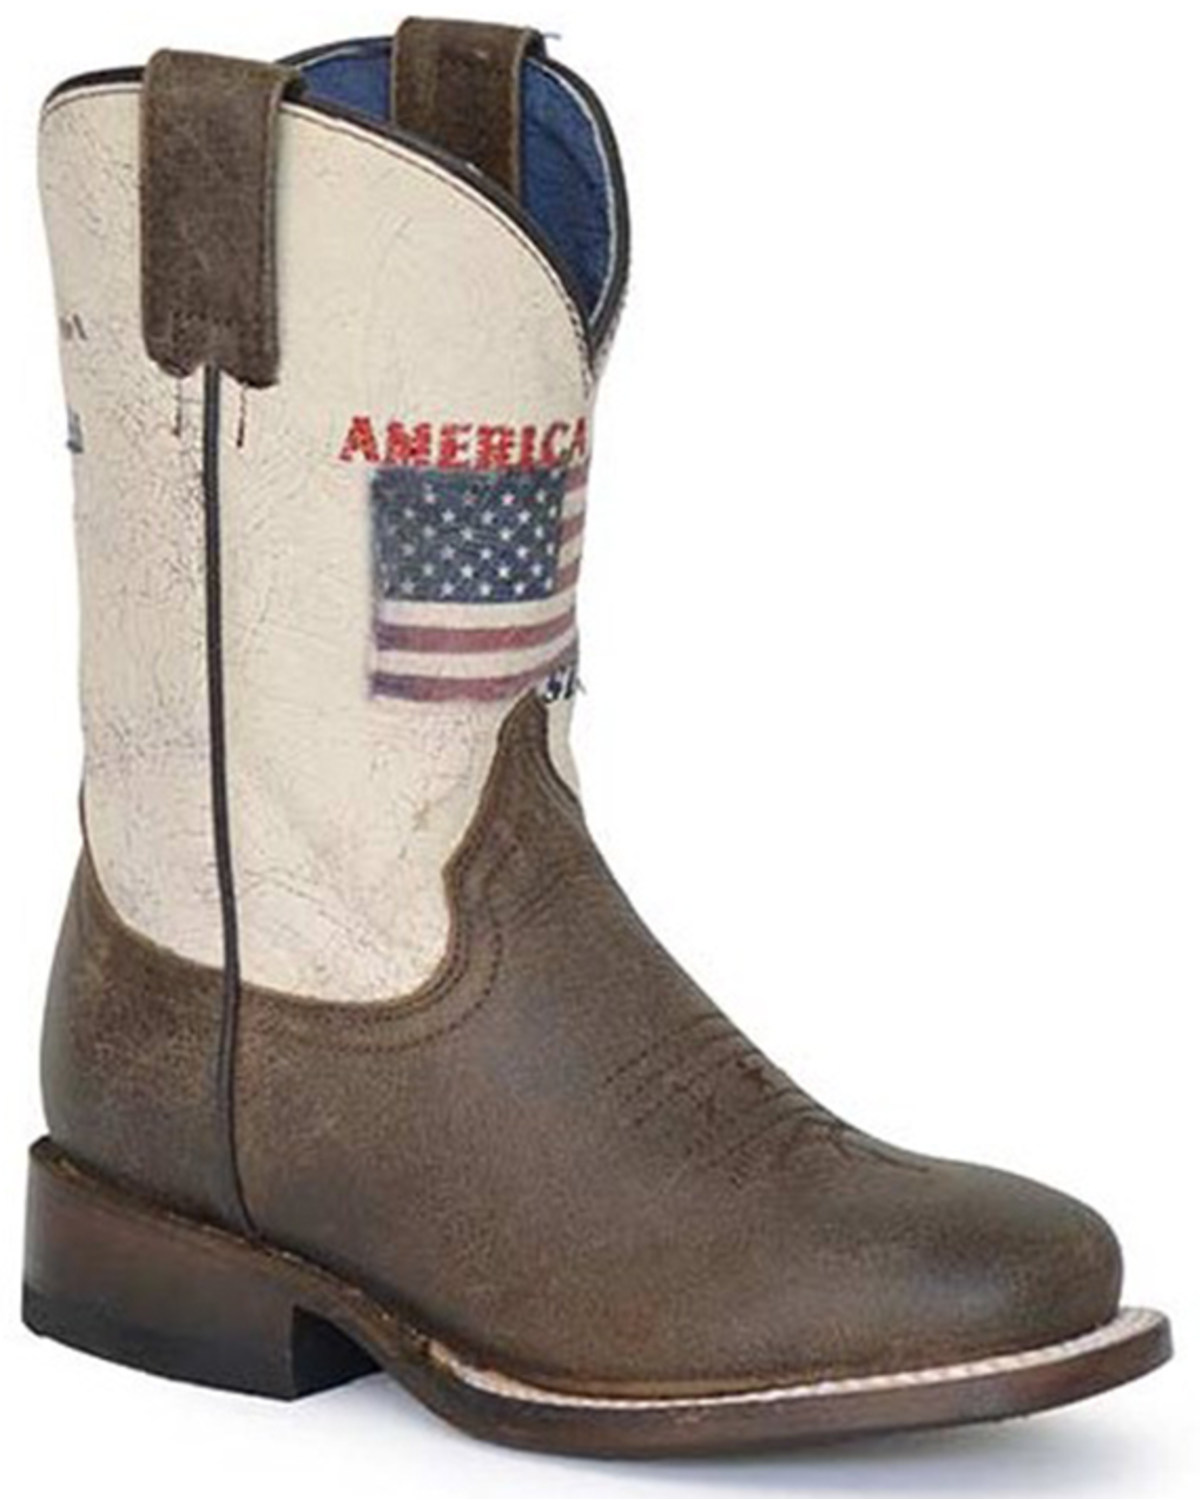 Roper Boys' American Strong Western Boots - Broad Square Toe